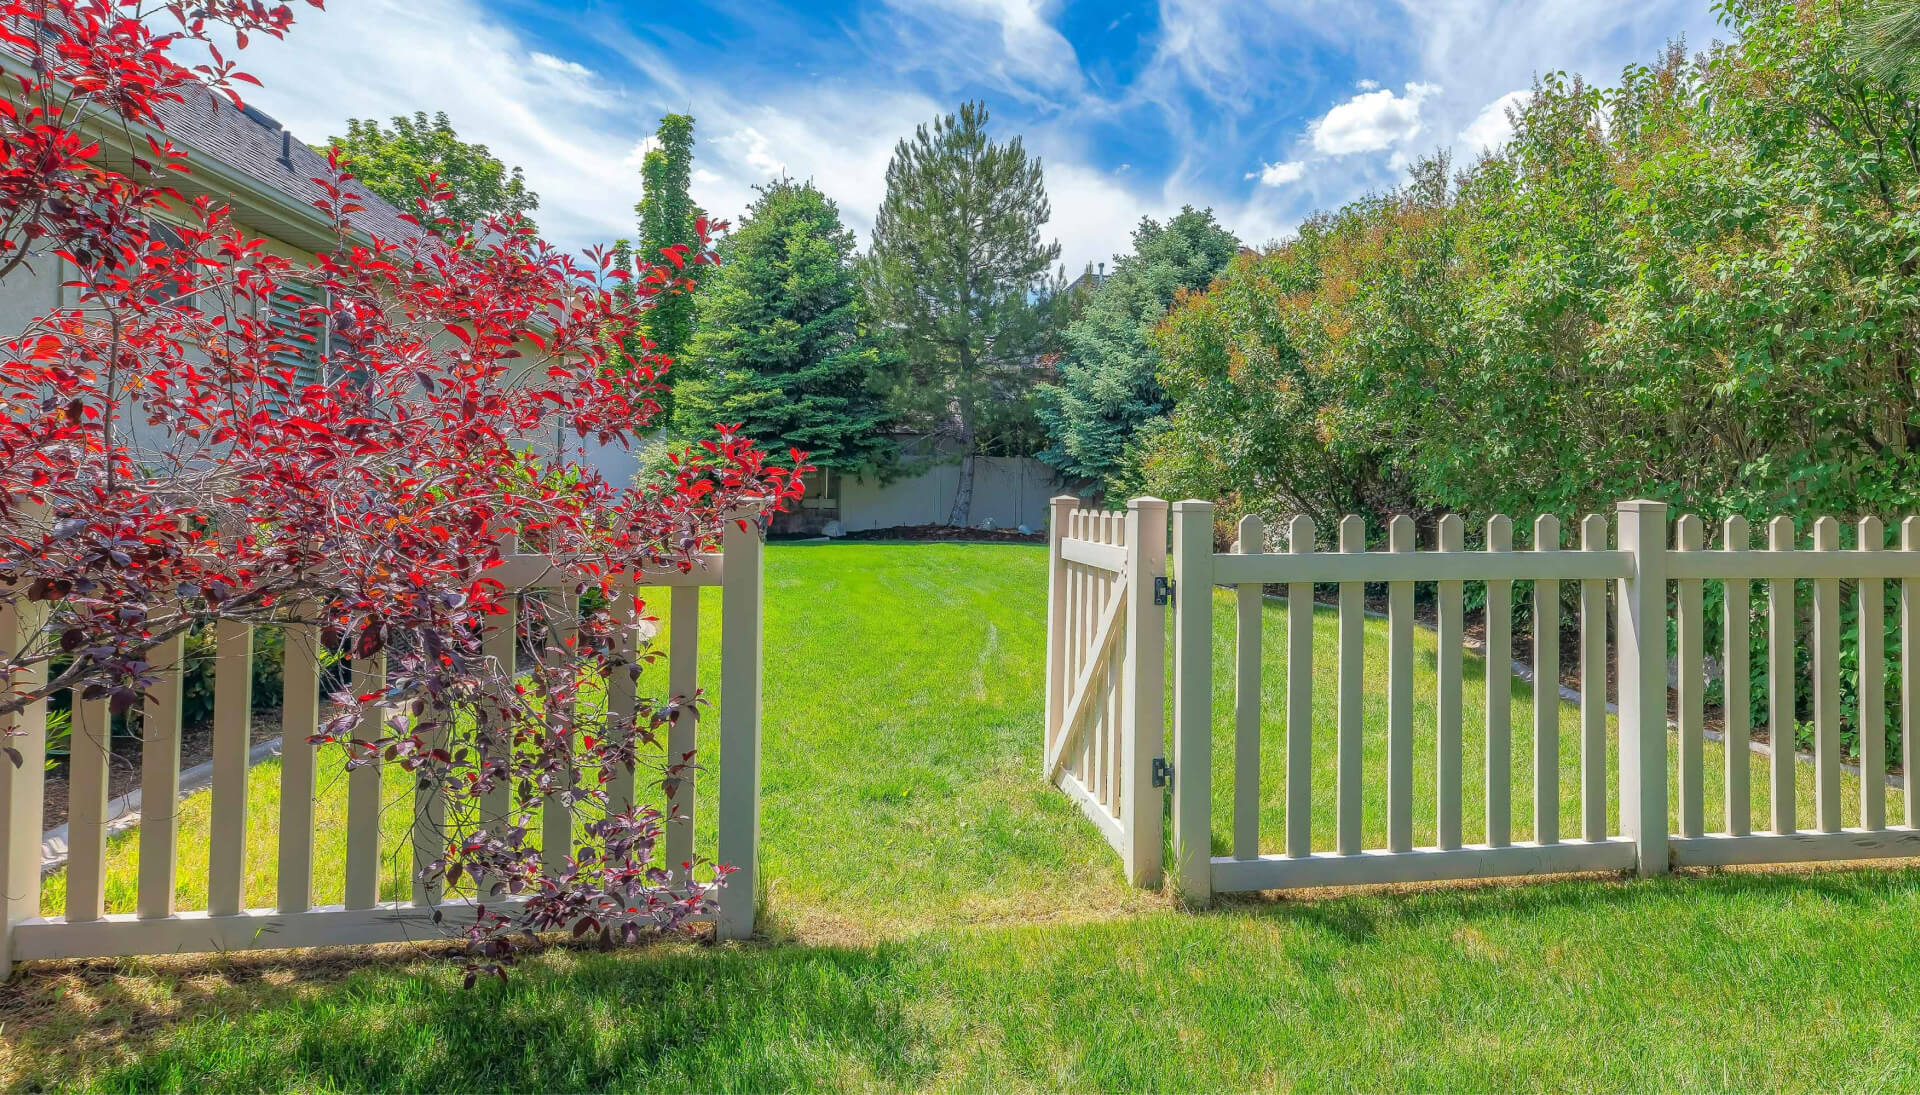 A functional fence gate providing access to a well-maintained backyard, surrounded by a wooden fence in Jacksonville